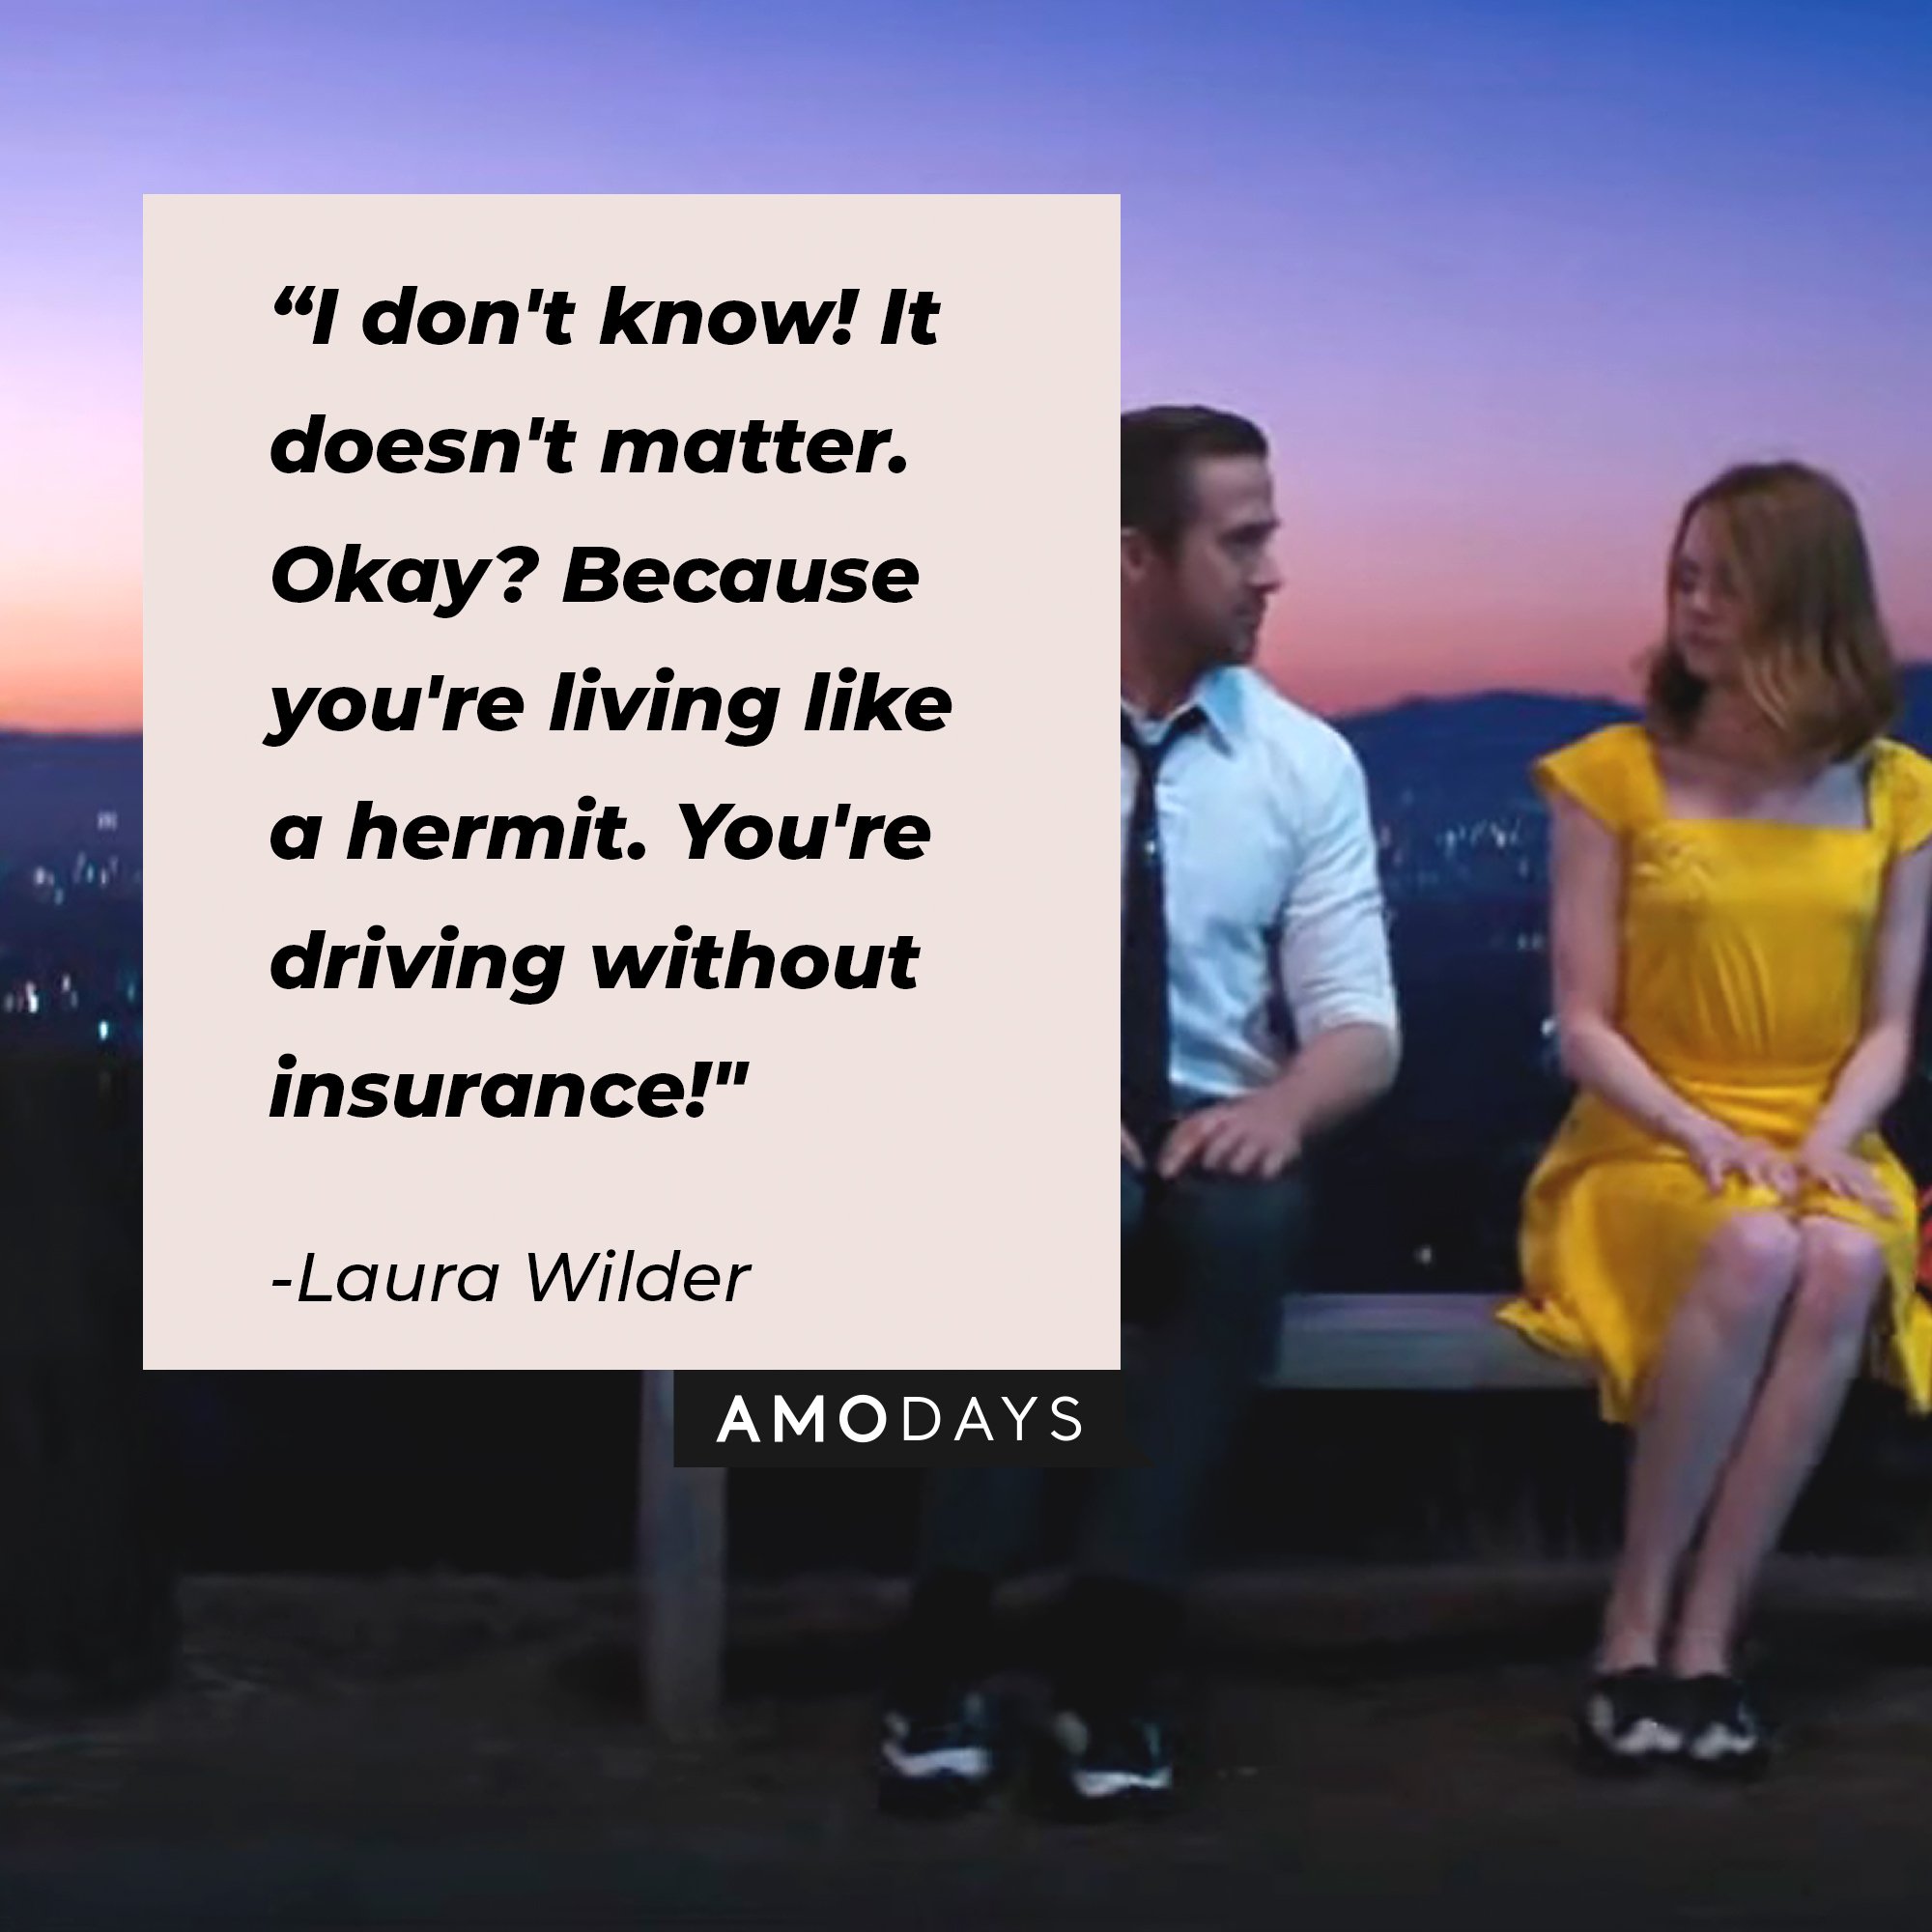 Laura Wilder’s quote: "I don't know! It doesn't matter. Okay? Because you're living like a hermit. You're driving without insurance!” | Image: AmoDays